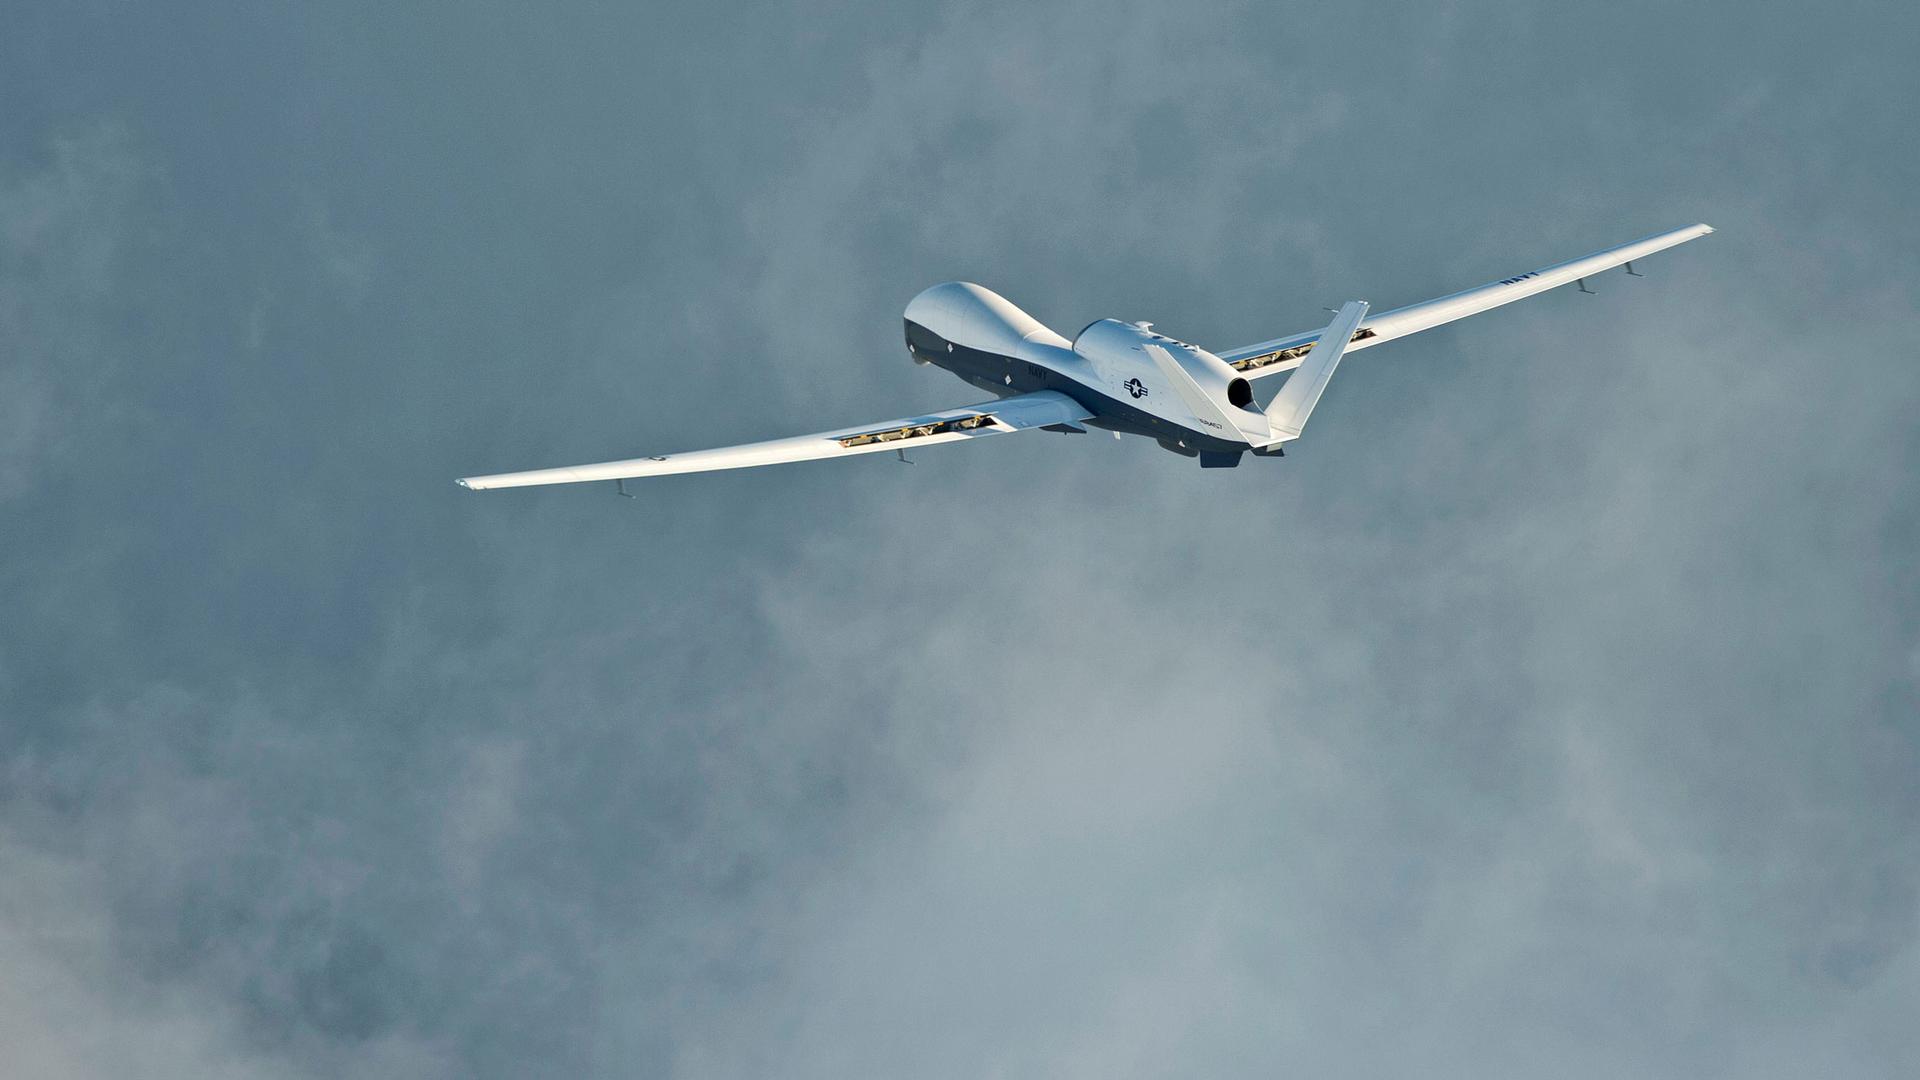 A large military drone is shown with a white top and dark underside.